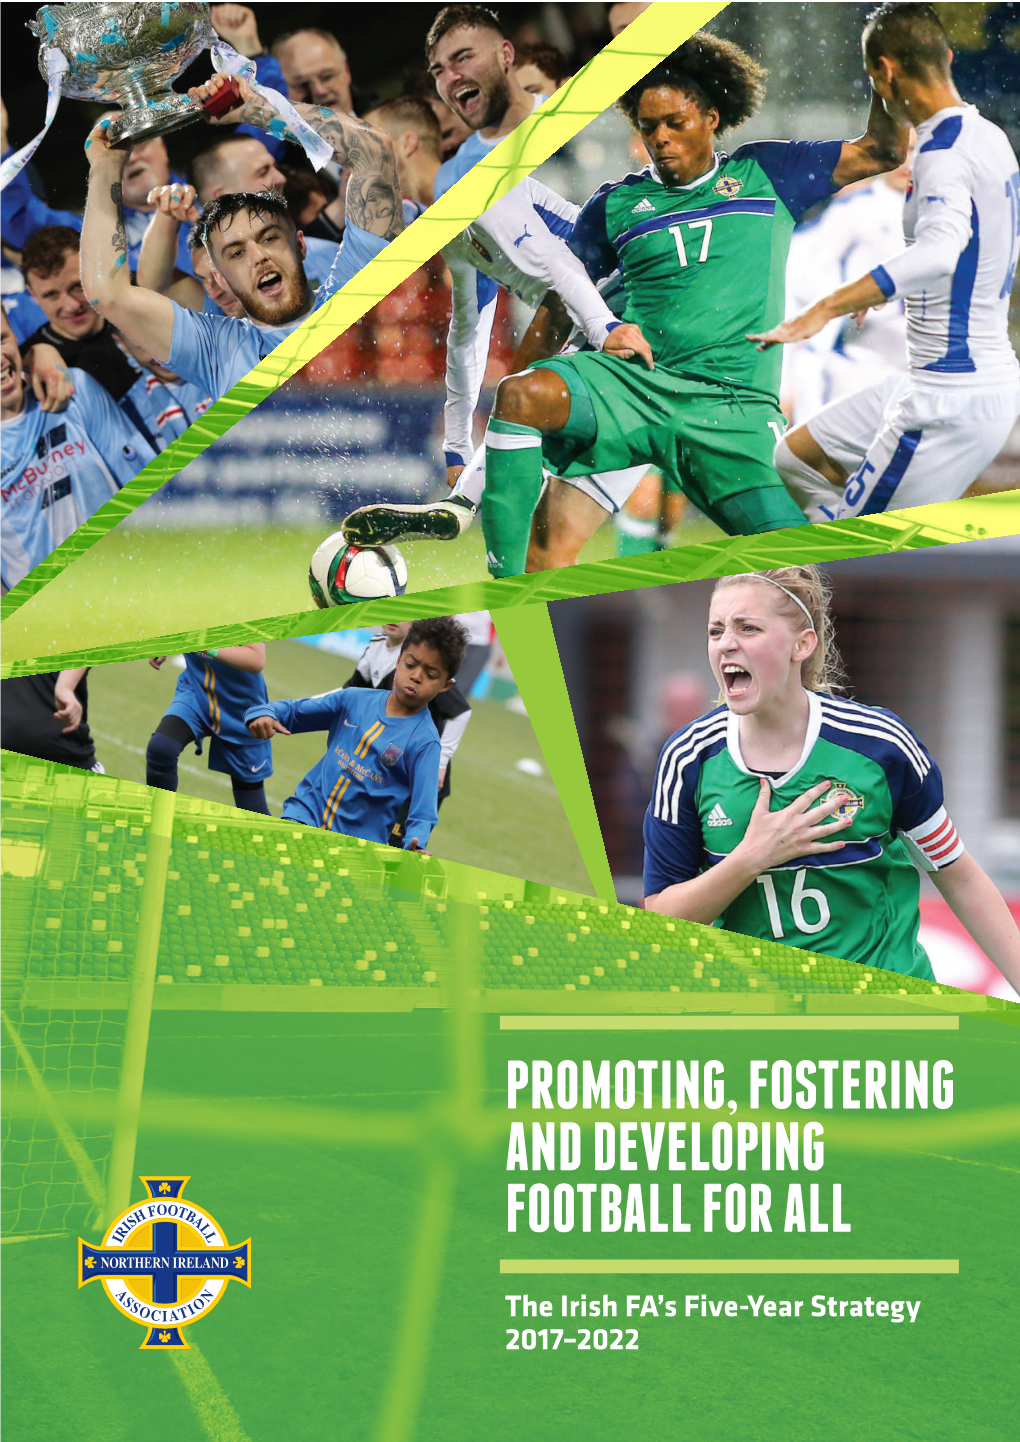 Promoting, Fostering and Developing Football for All